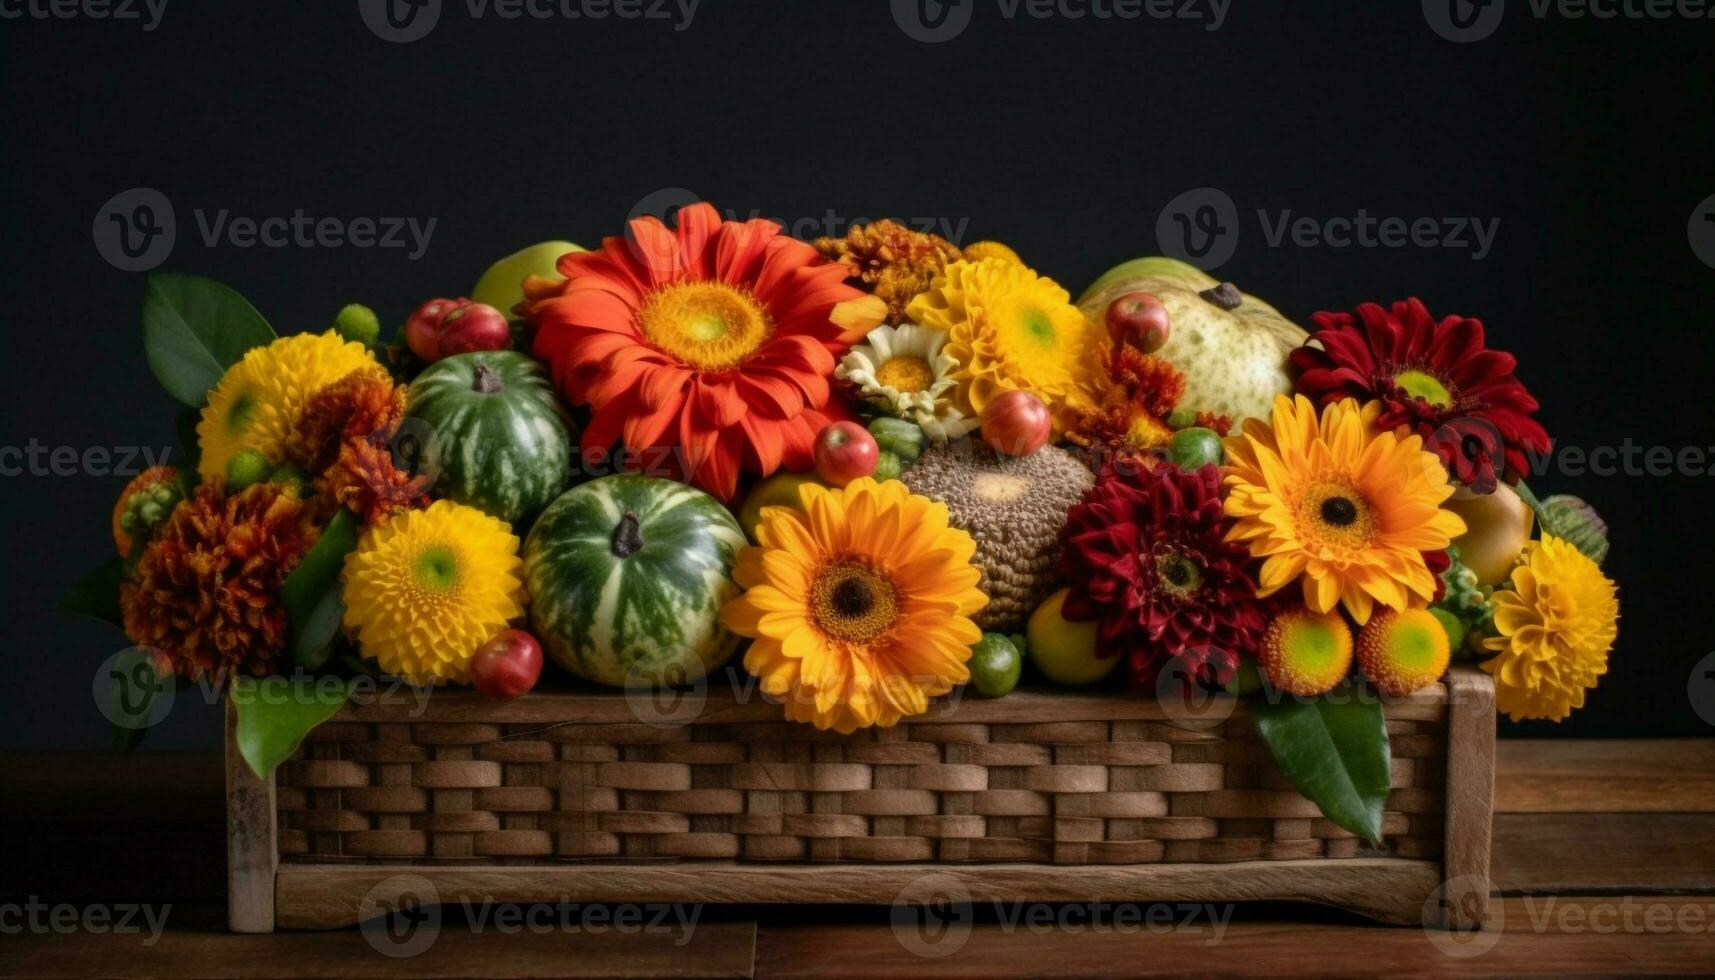 Autumn celebration Rustic vase holds multi colored flower arrangement on table generated by AI photo